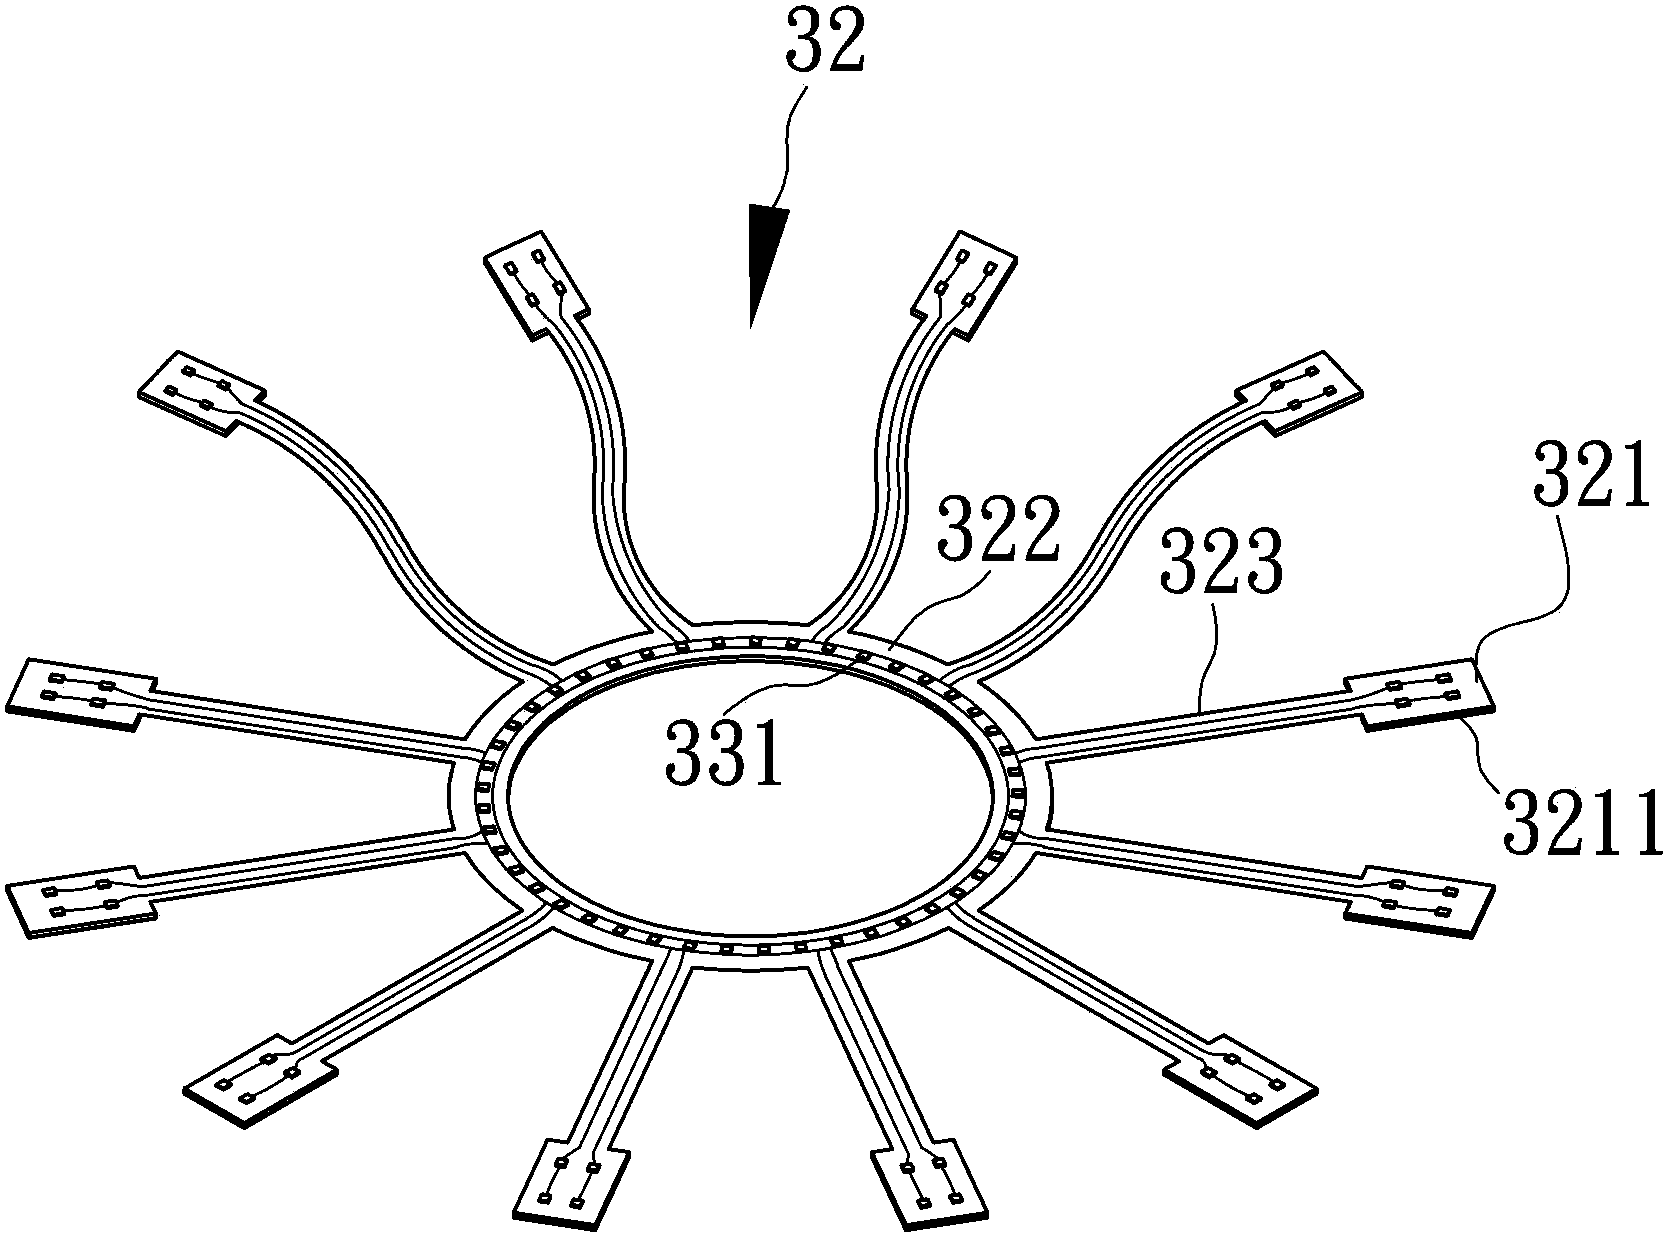 Microspur light supplement module with flexible circuit boards